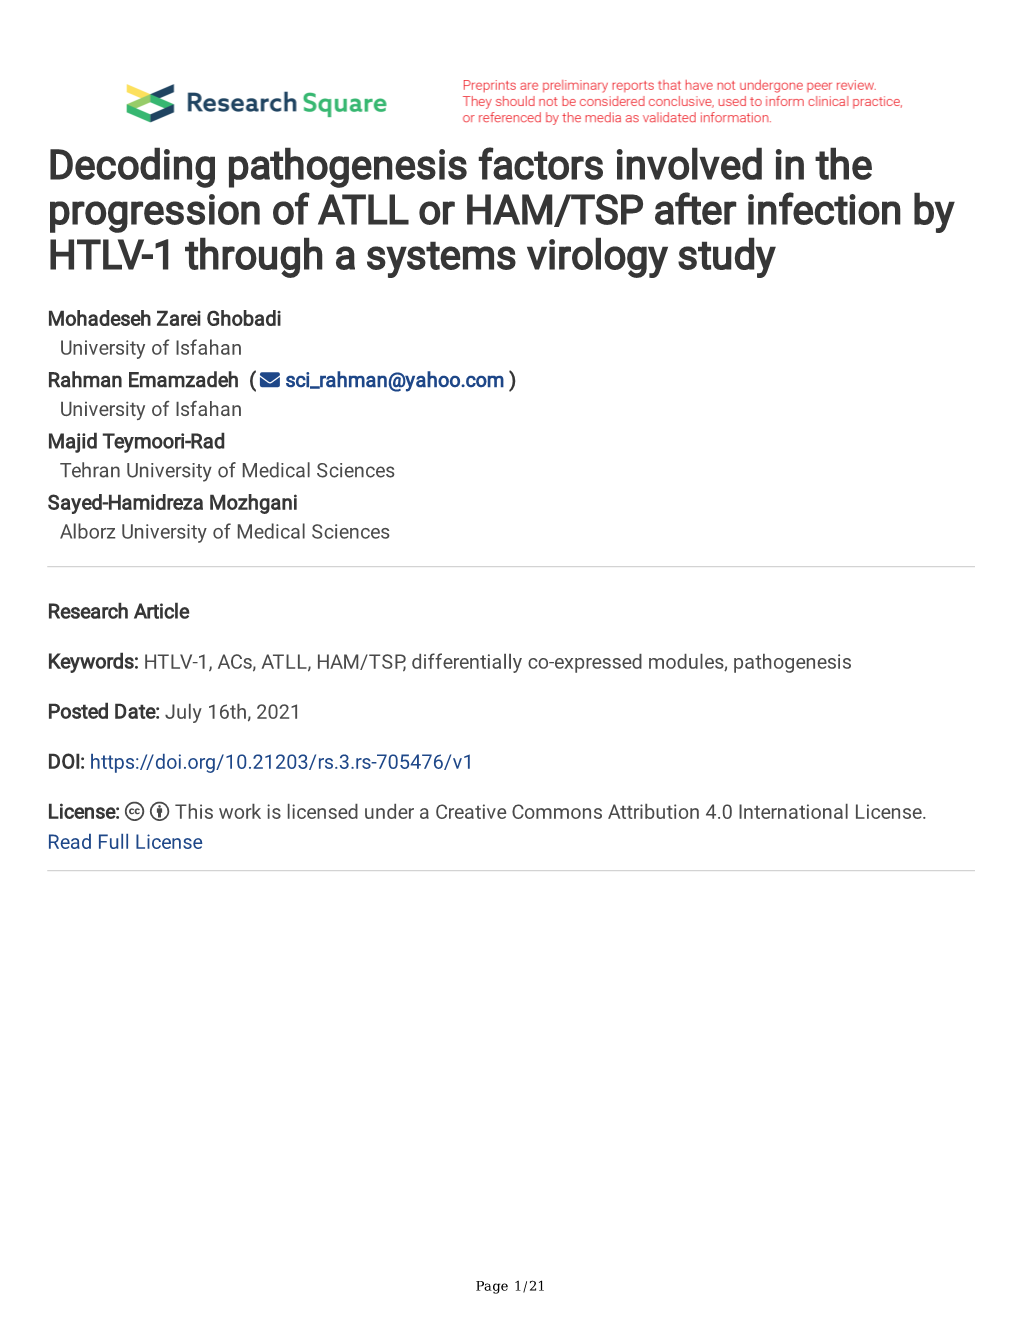 Decoding Pathogenesis Factors Involved in the Progression of ATLL Or HAM/TSP After Infection by HTLV-1 Through a Systems Virology Study